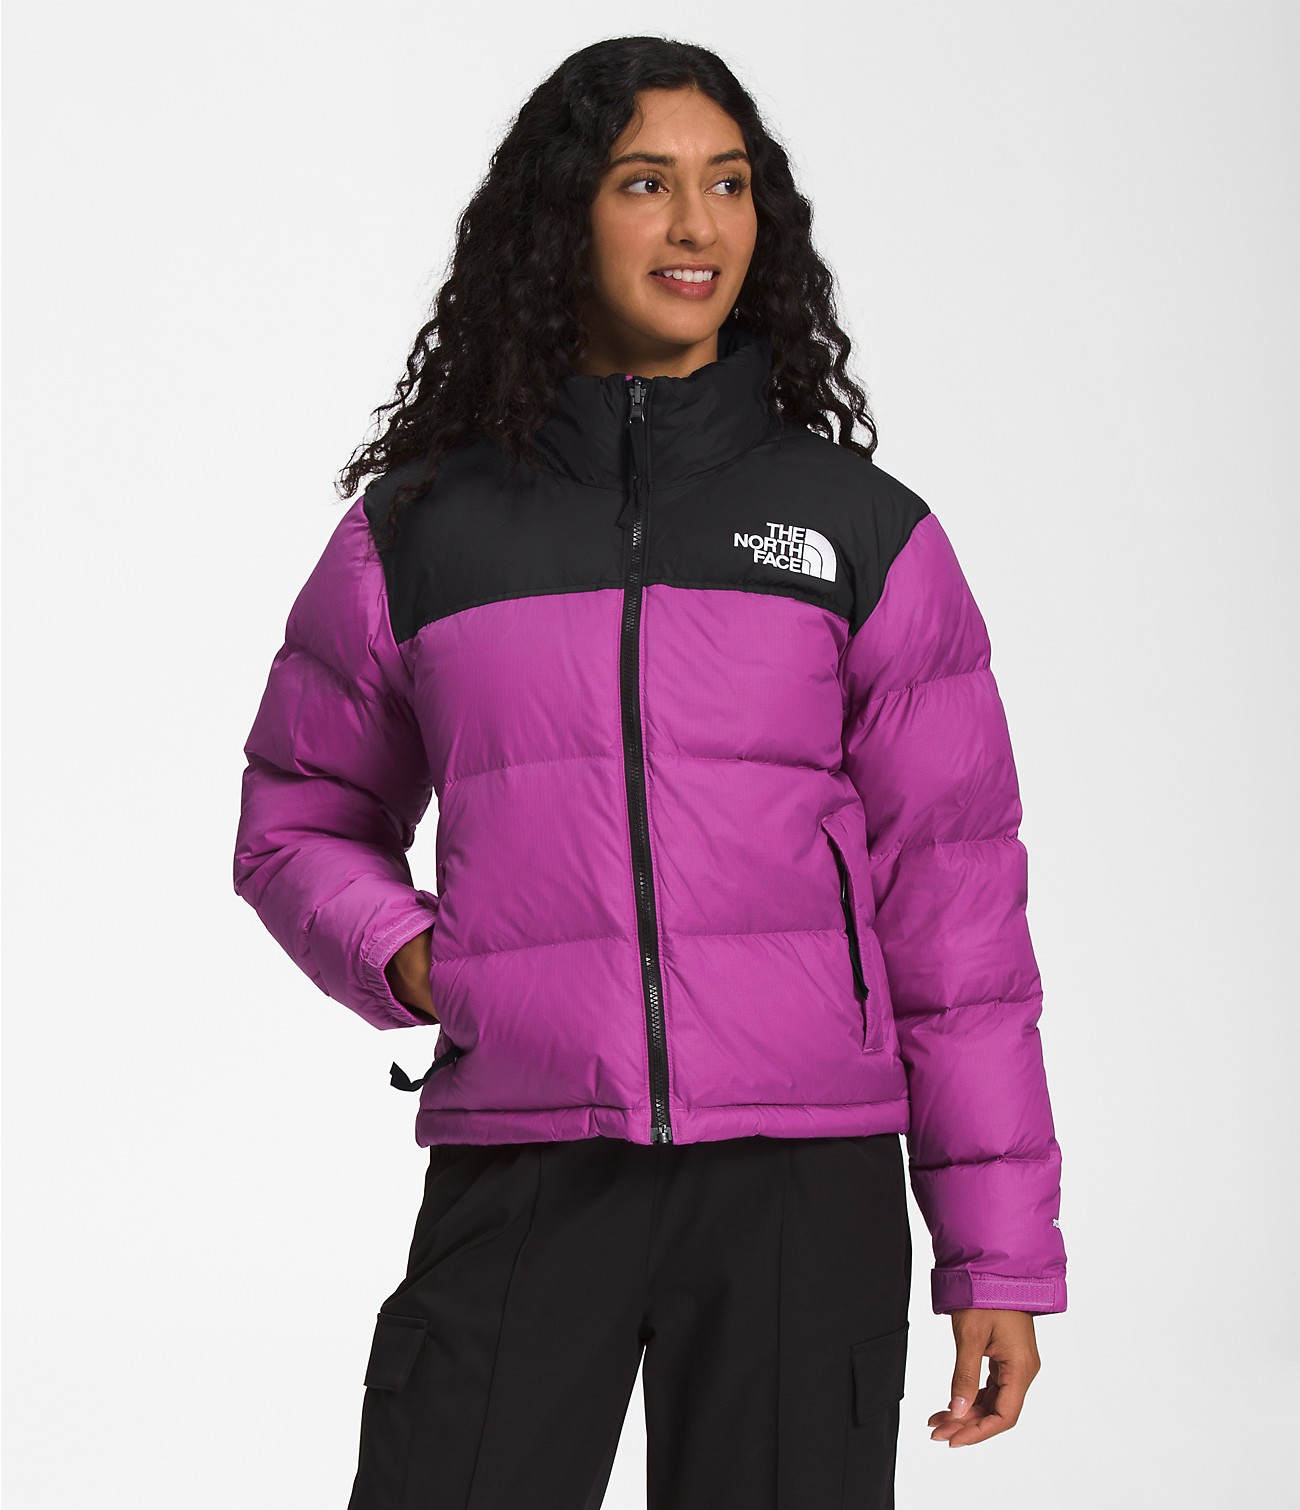 Unlock Wilderness' choice in the Kathmandu Vs North Face comparison, the 1996 Retro Nuptse Jacket by The North Face